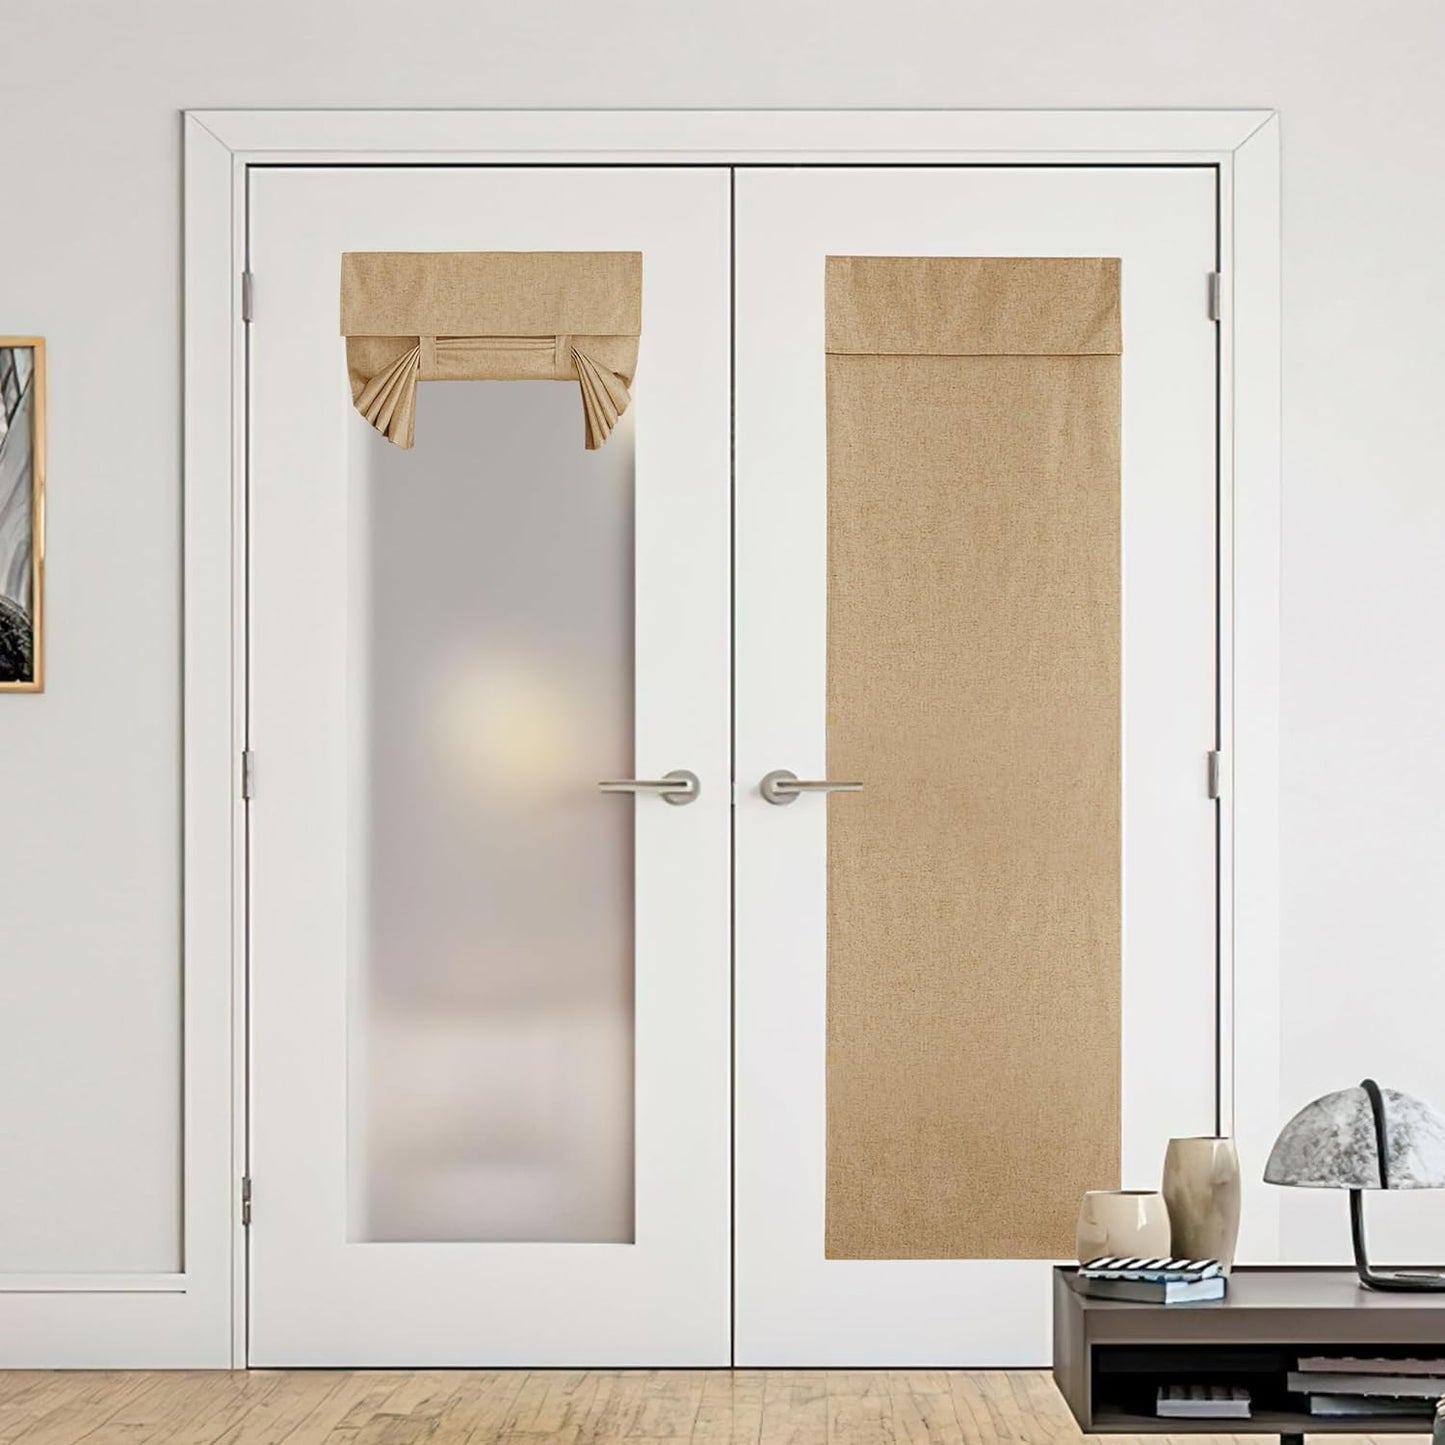 NICETOWN Linen Door Curtain for Door Window, Farmhouse French Door Curtain Shade for Kitchen Bathroom Energy Saving 100% Blackout Tie up Shade for Patio Sliding Glass, 1 Panel, Natural, 26" W X 72" L  NICETOWN Camel W36 X L72 